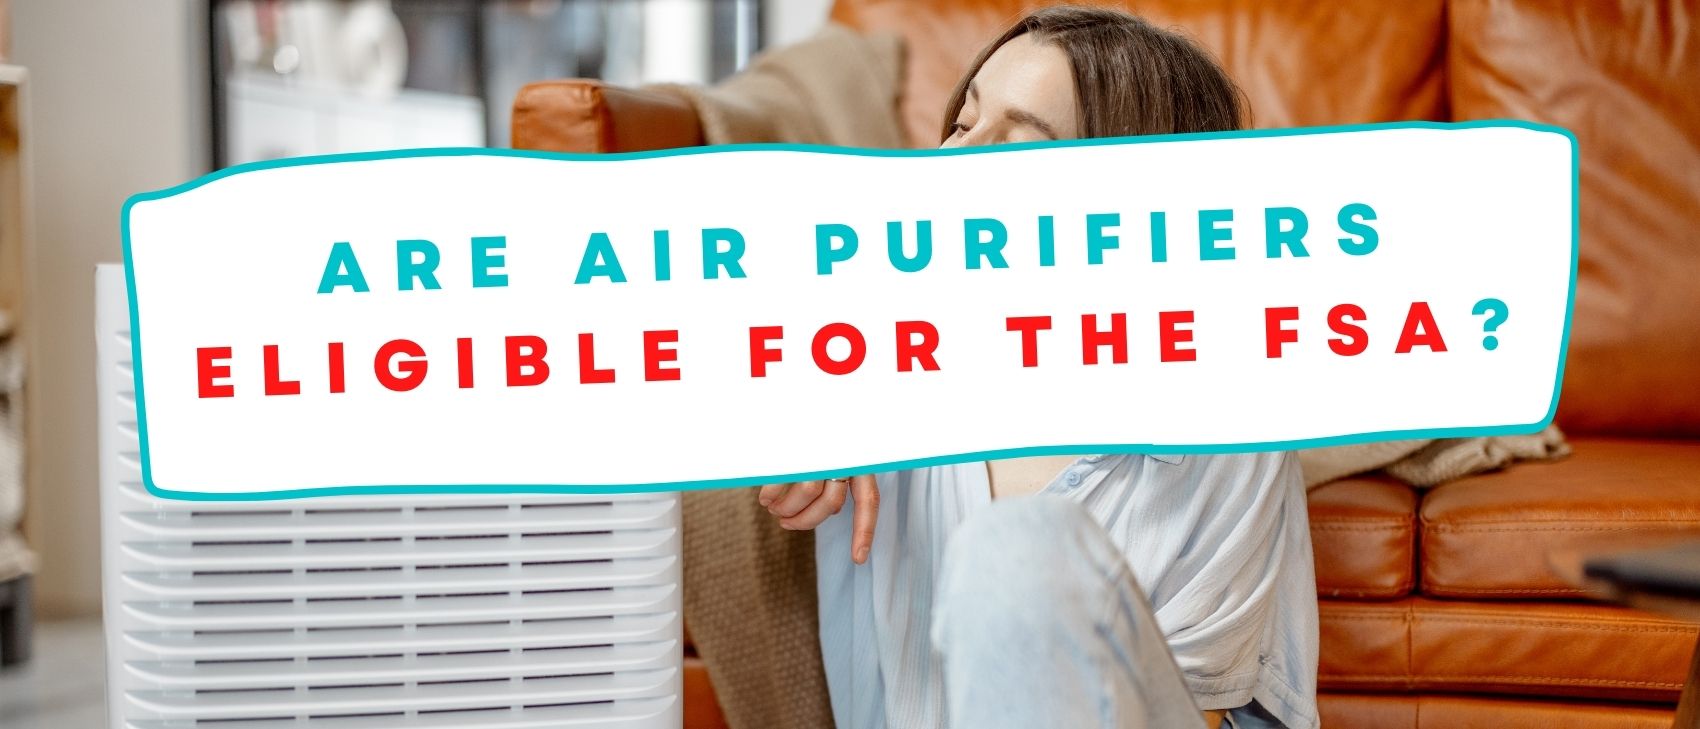 Are Air Purifiers Eligible for the FSA?